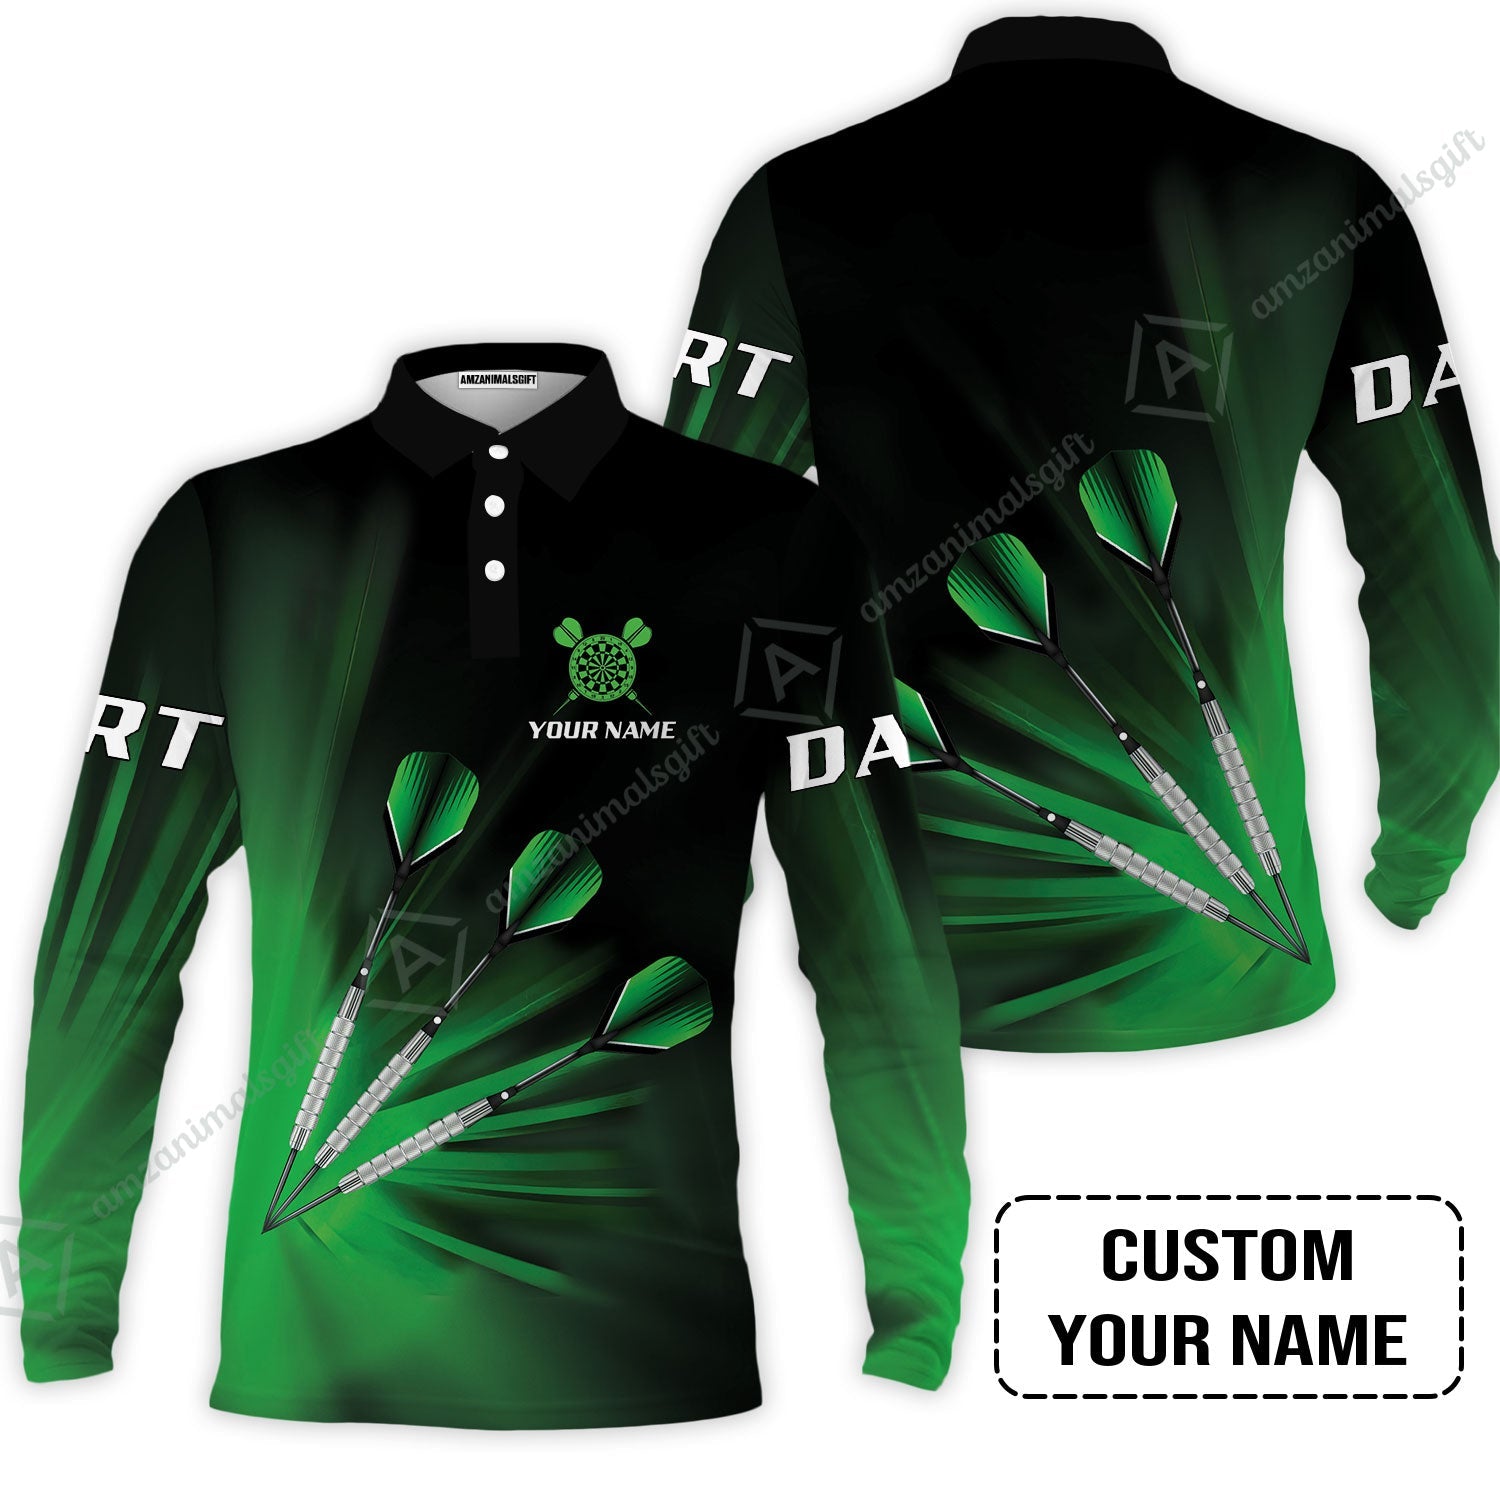 Customized Darts Long Sleeve Men Polo Shirt, Personalized Name Polo Shirt For Men - Perfect Gift For Darts Lovers, Darts Players